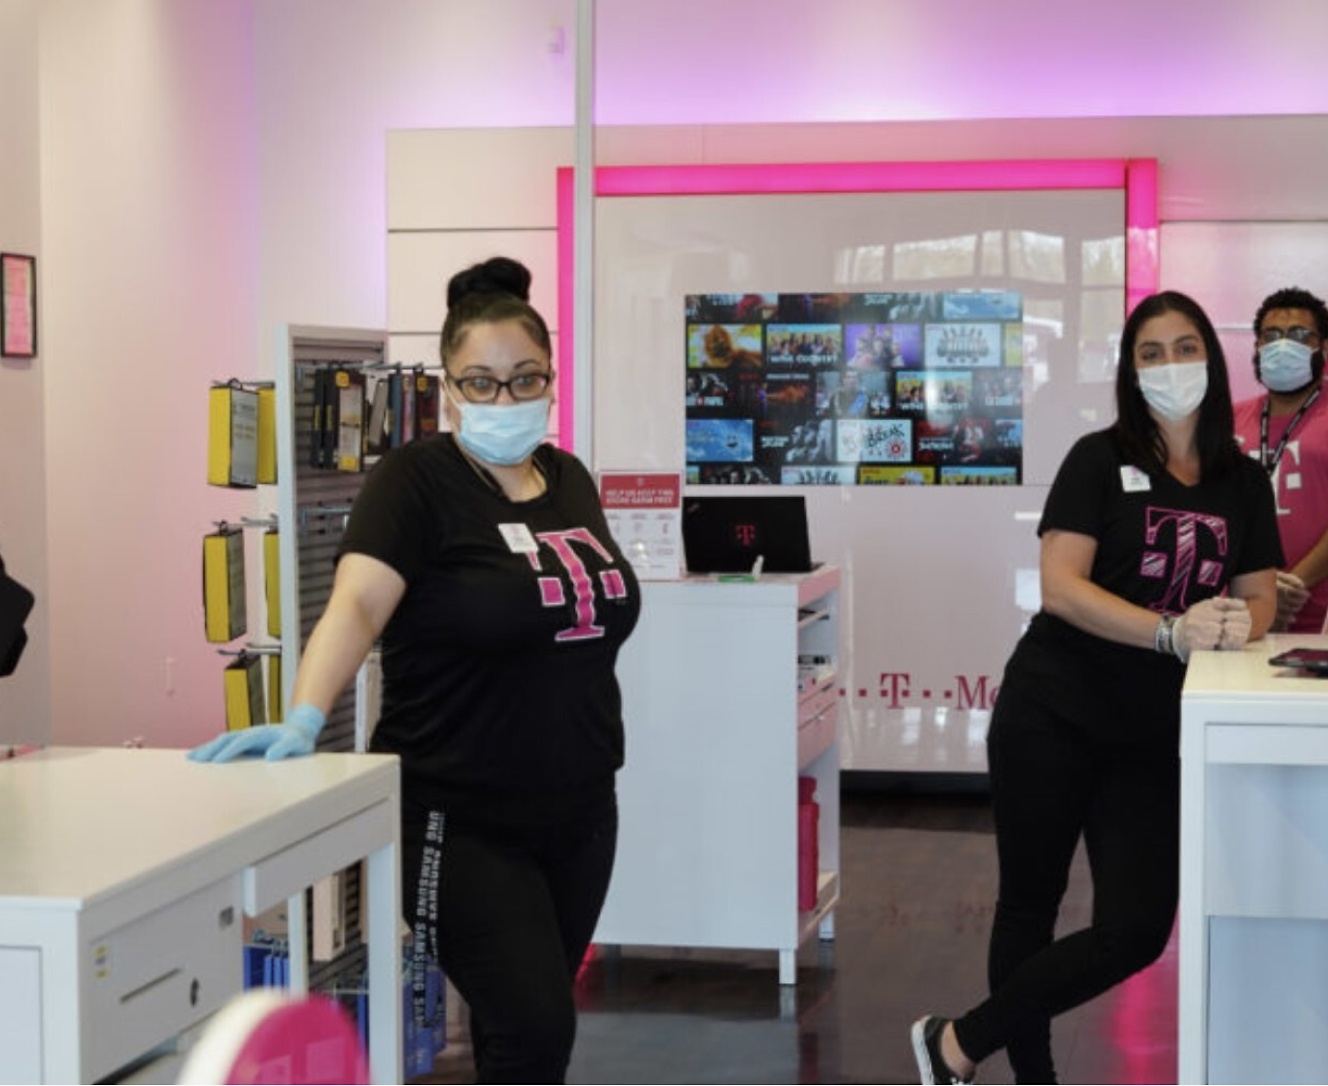 A group of people wearing face masks in a store.